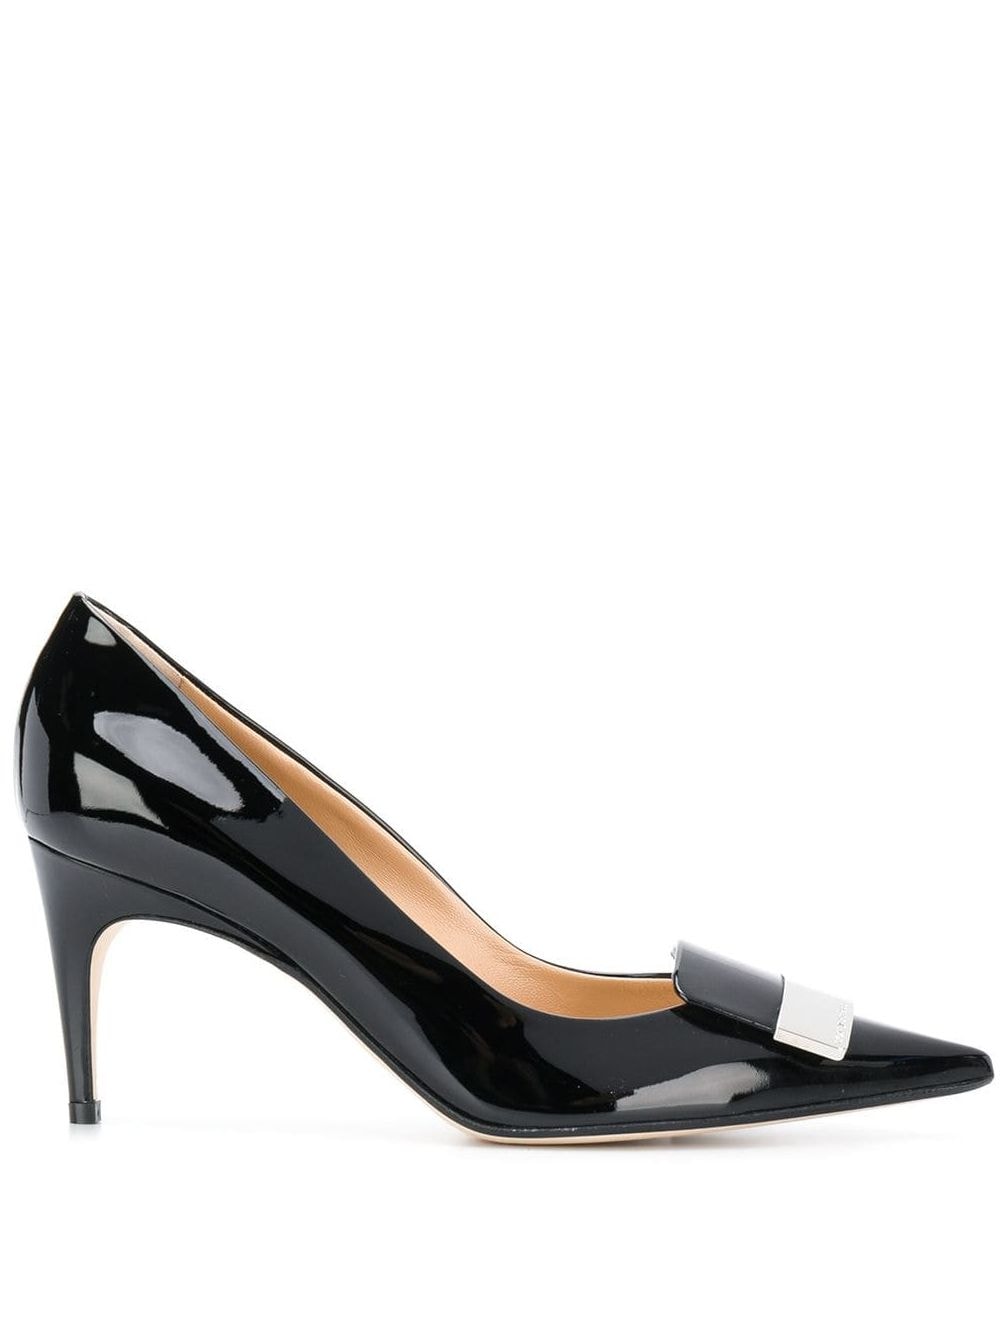 Image 1 of Sergio Rossi pointed bow pumps